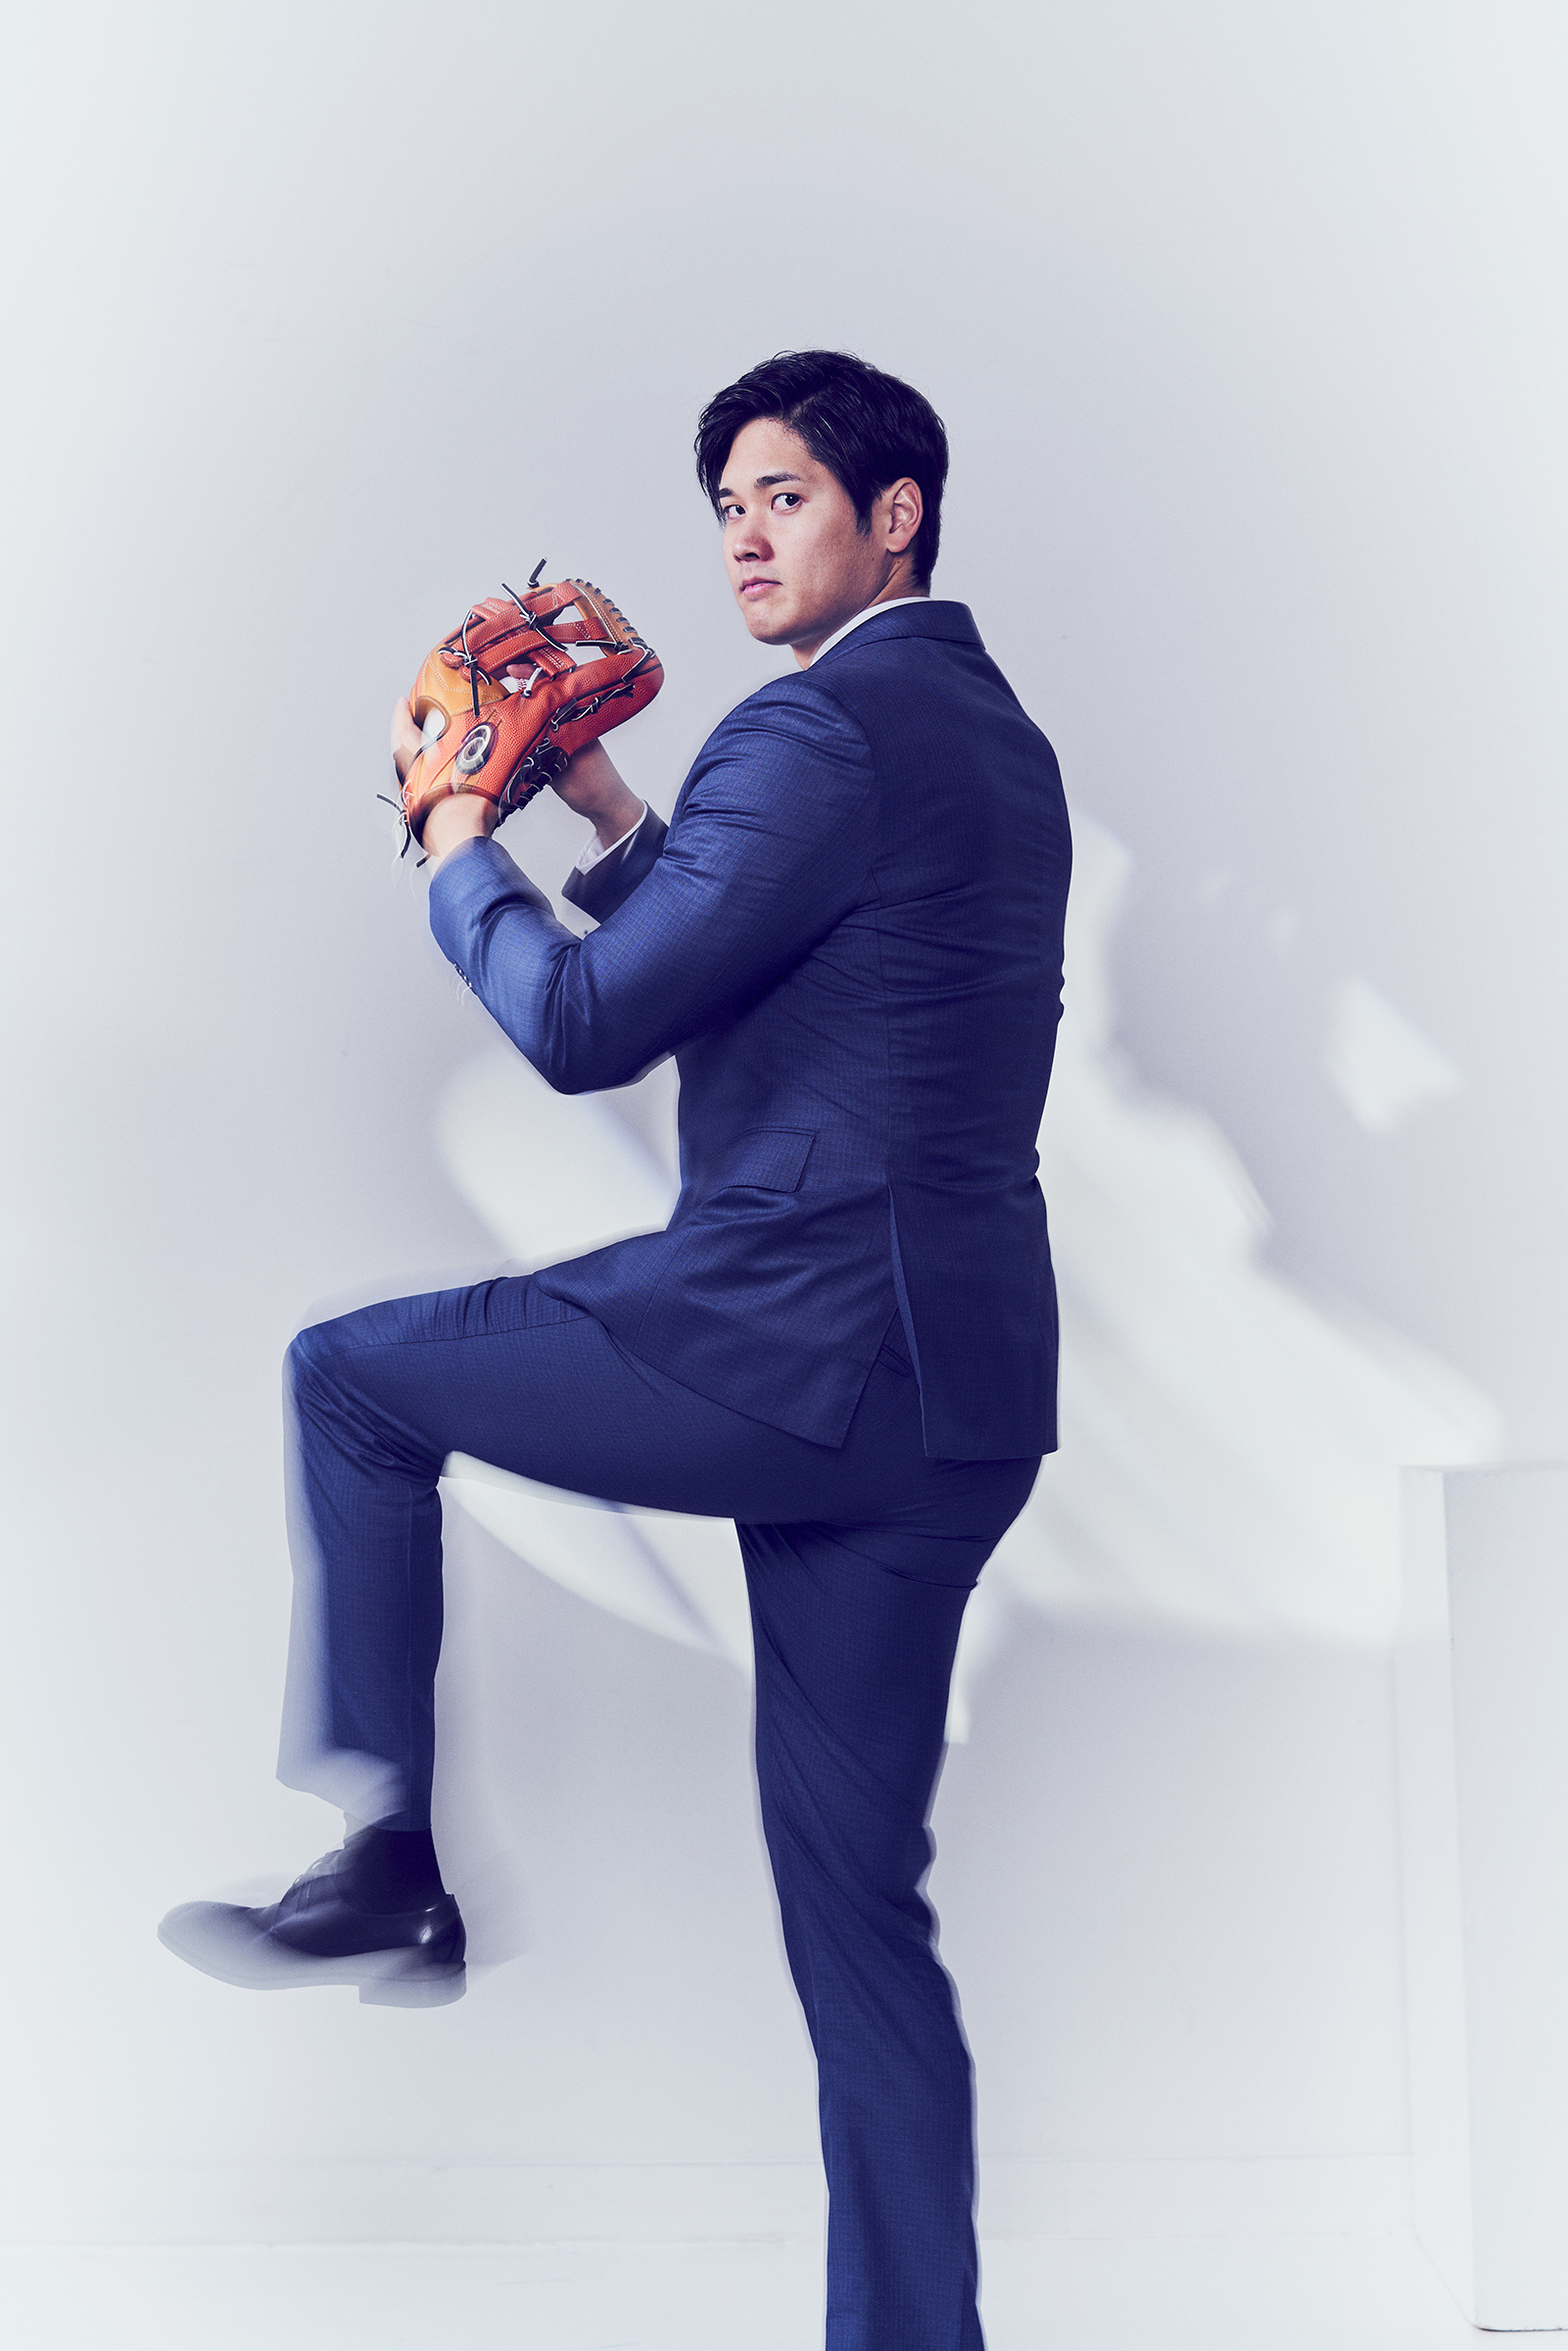 <strong>Shohei Ohtani, the unanimous 2021 AL MVP, photographed on Jan. 23.</strong> "<a href="https://time.com/6165003/shohei-ohtani-baseball/">Shohei Ohtani Is What Baseball Needs,</a>" April 25 issue. (Ian Allen for TIME)